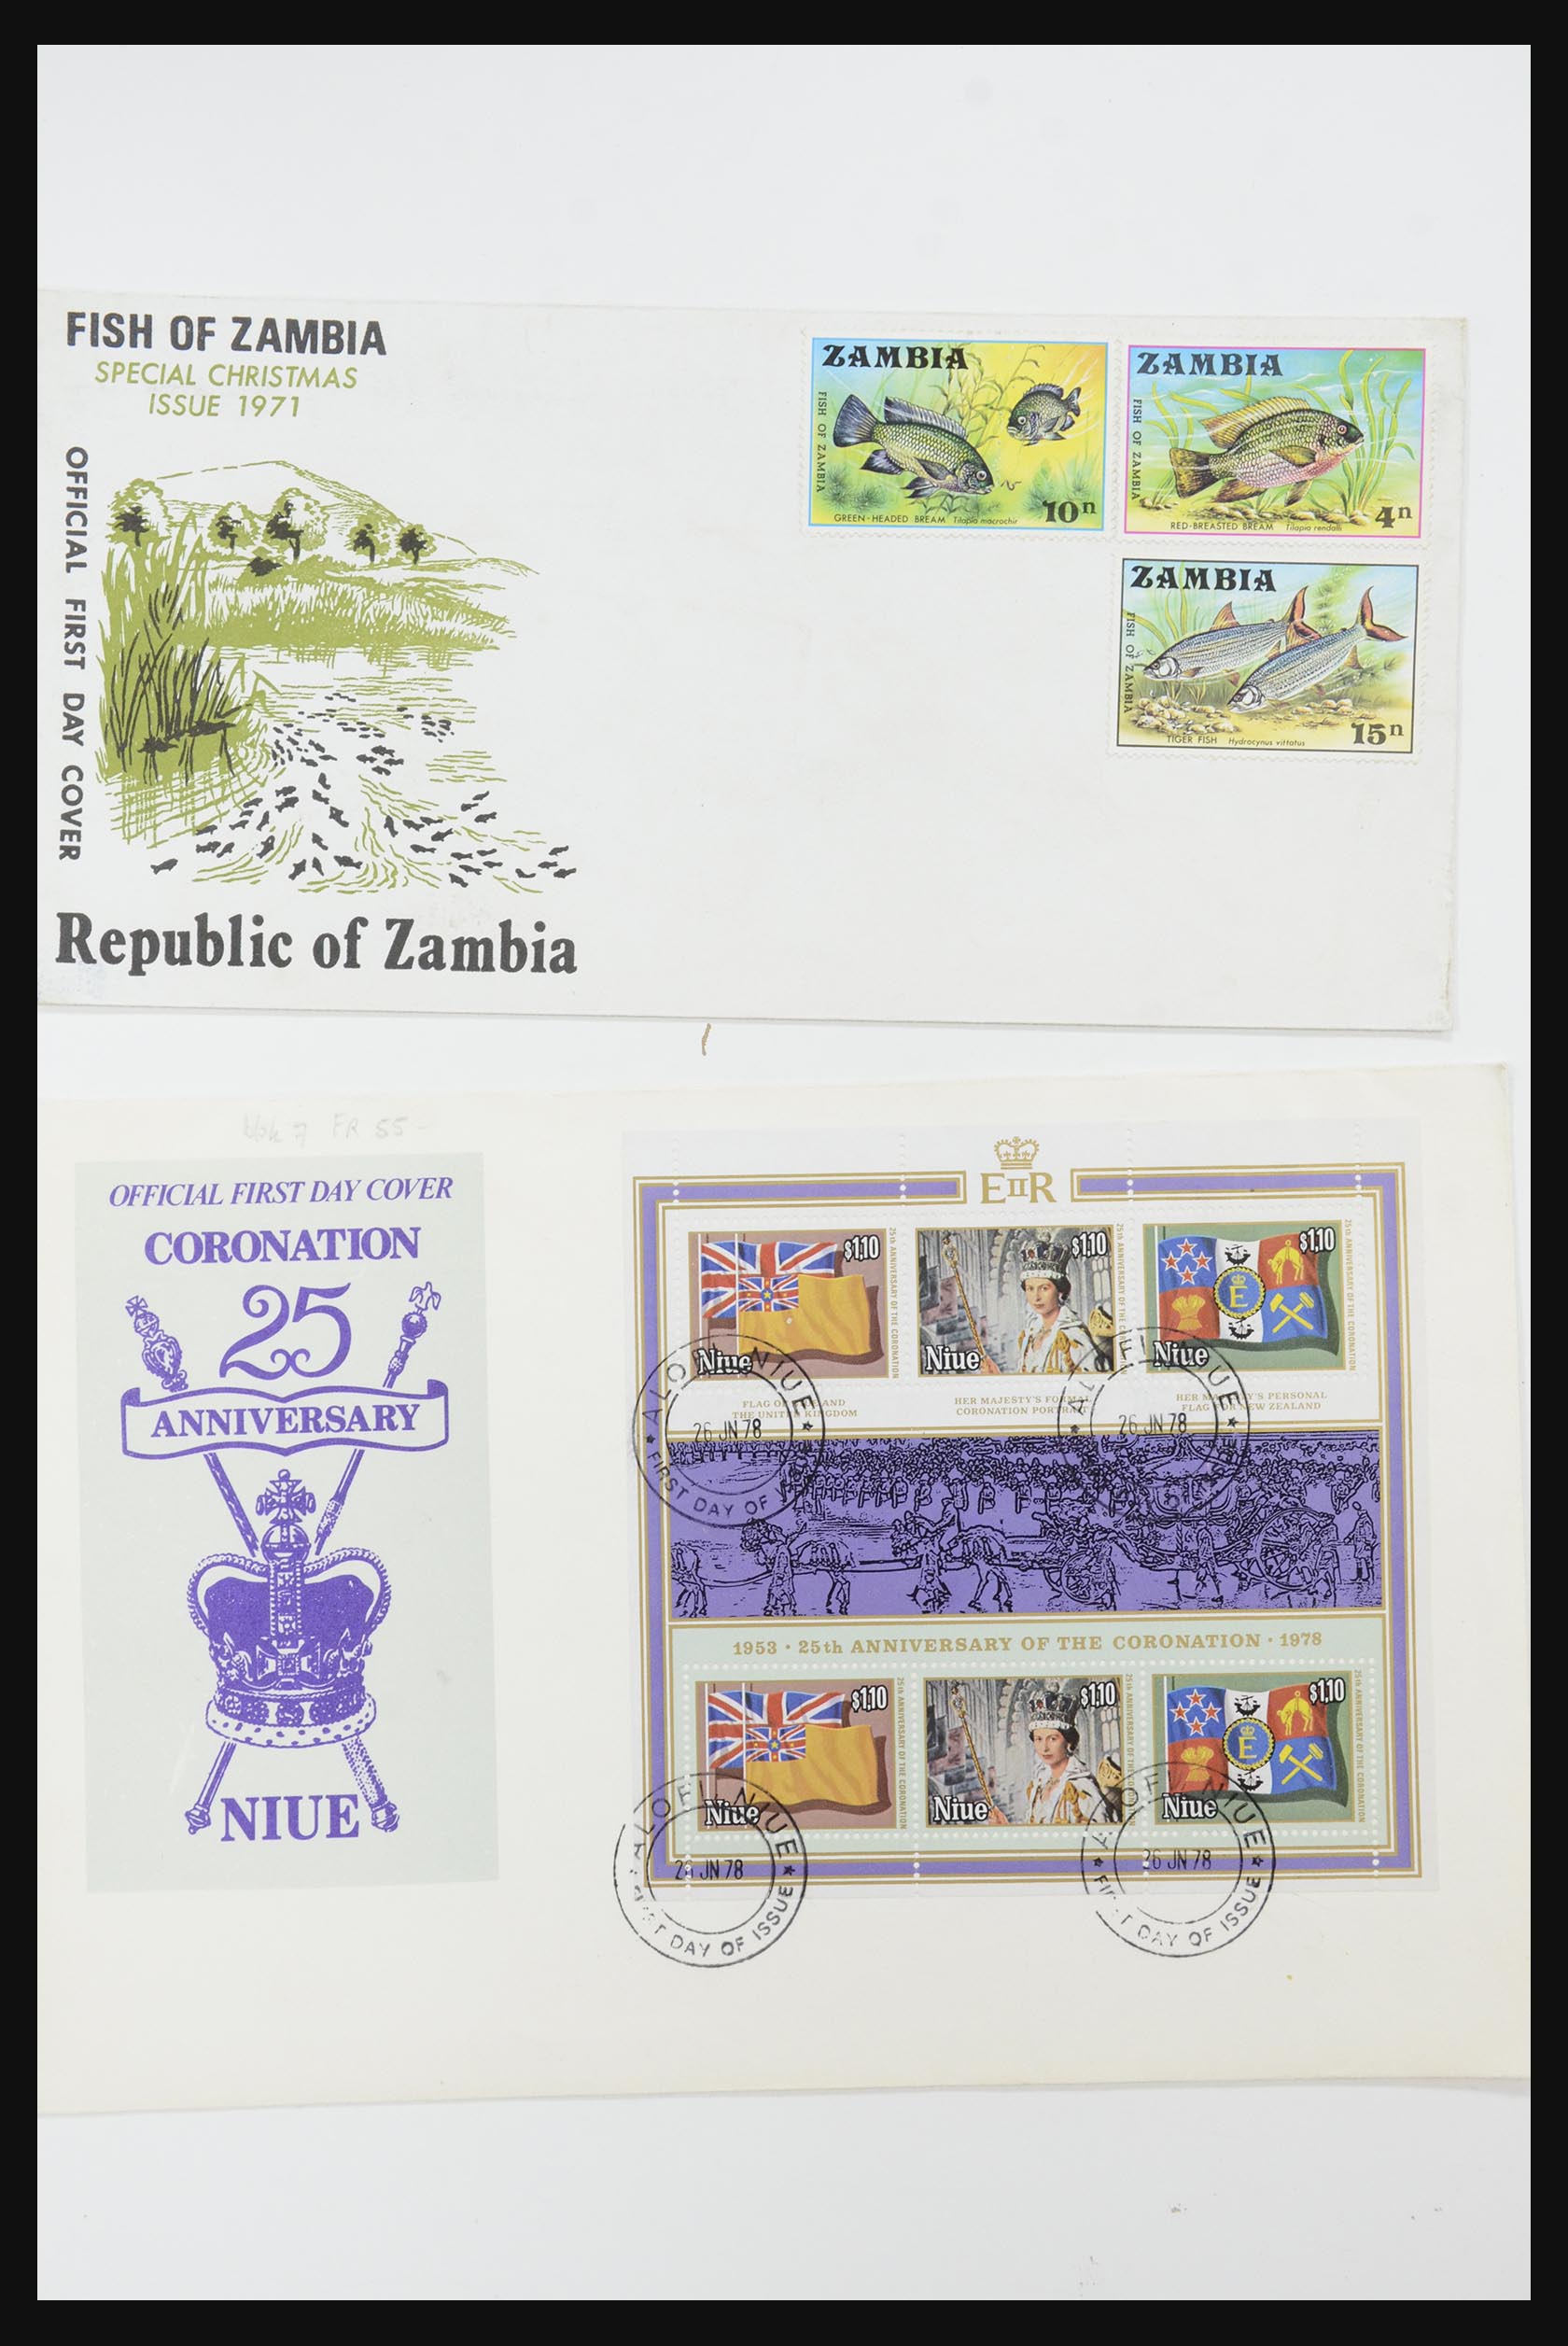 31726 677 - 31726 Great Britain and colonies covers and FDC's 1937-2001.